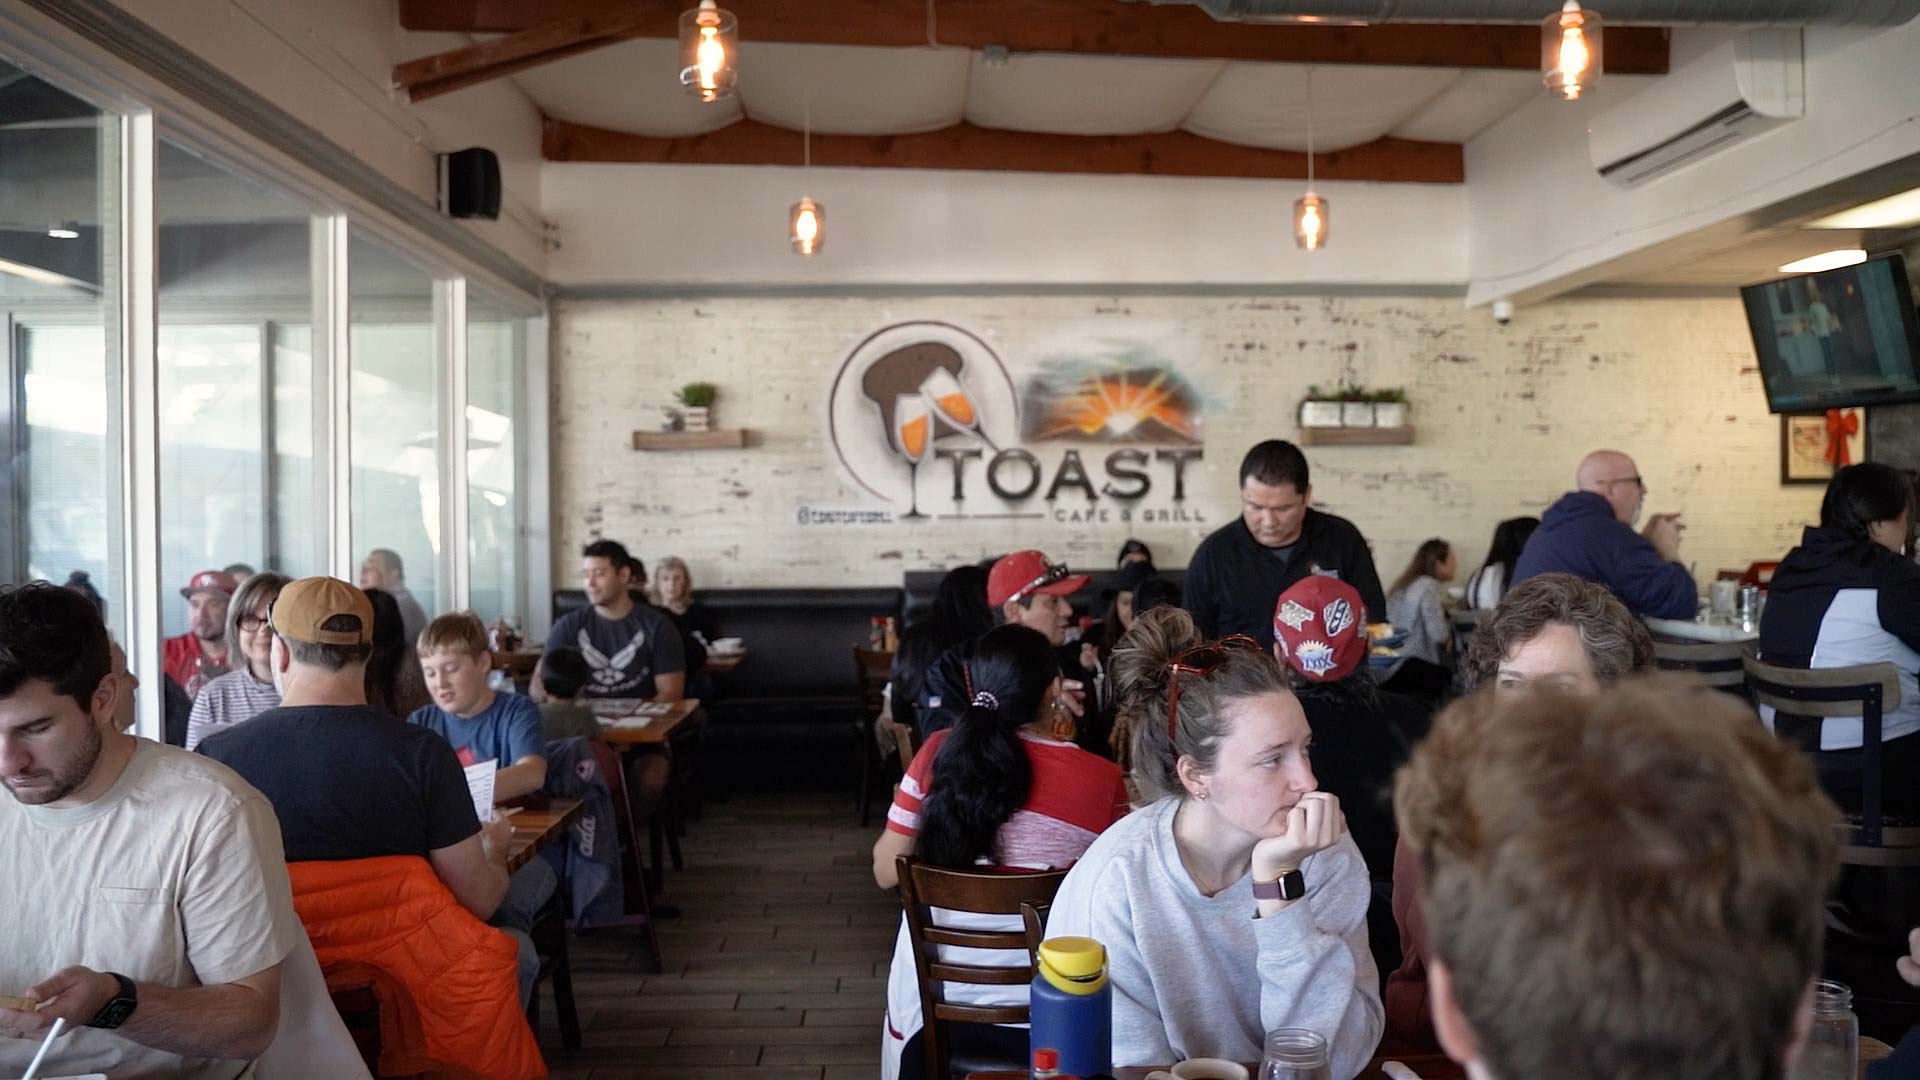 TOAST Cafe & Grill